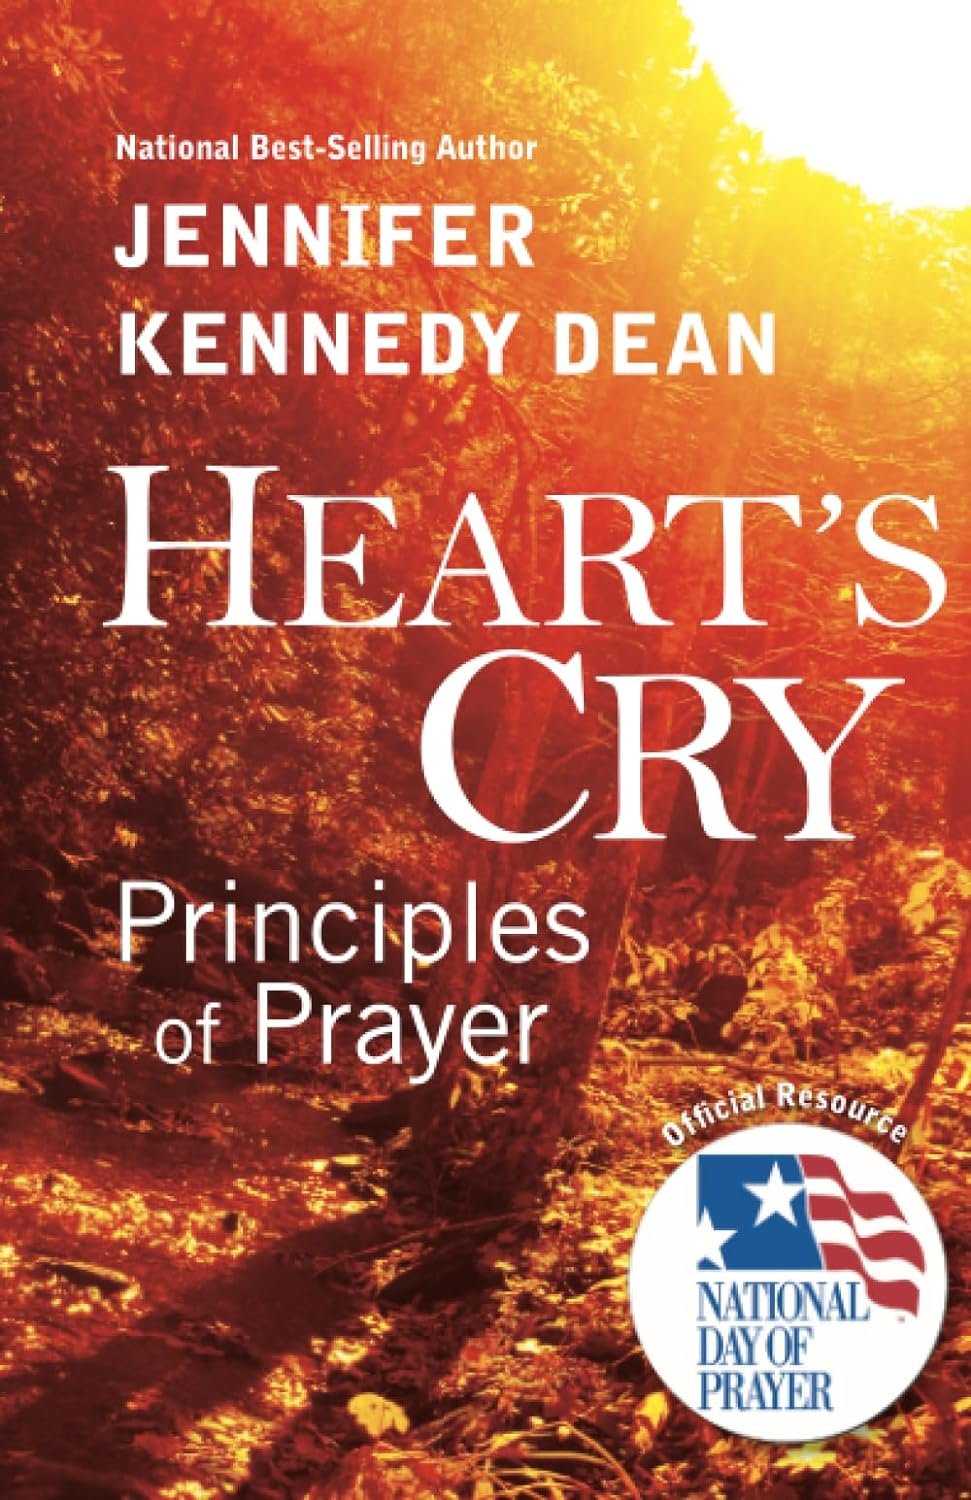 “Heart's Cry: Principles of Prayer” - by Jennifer Dean